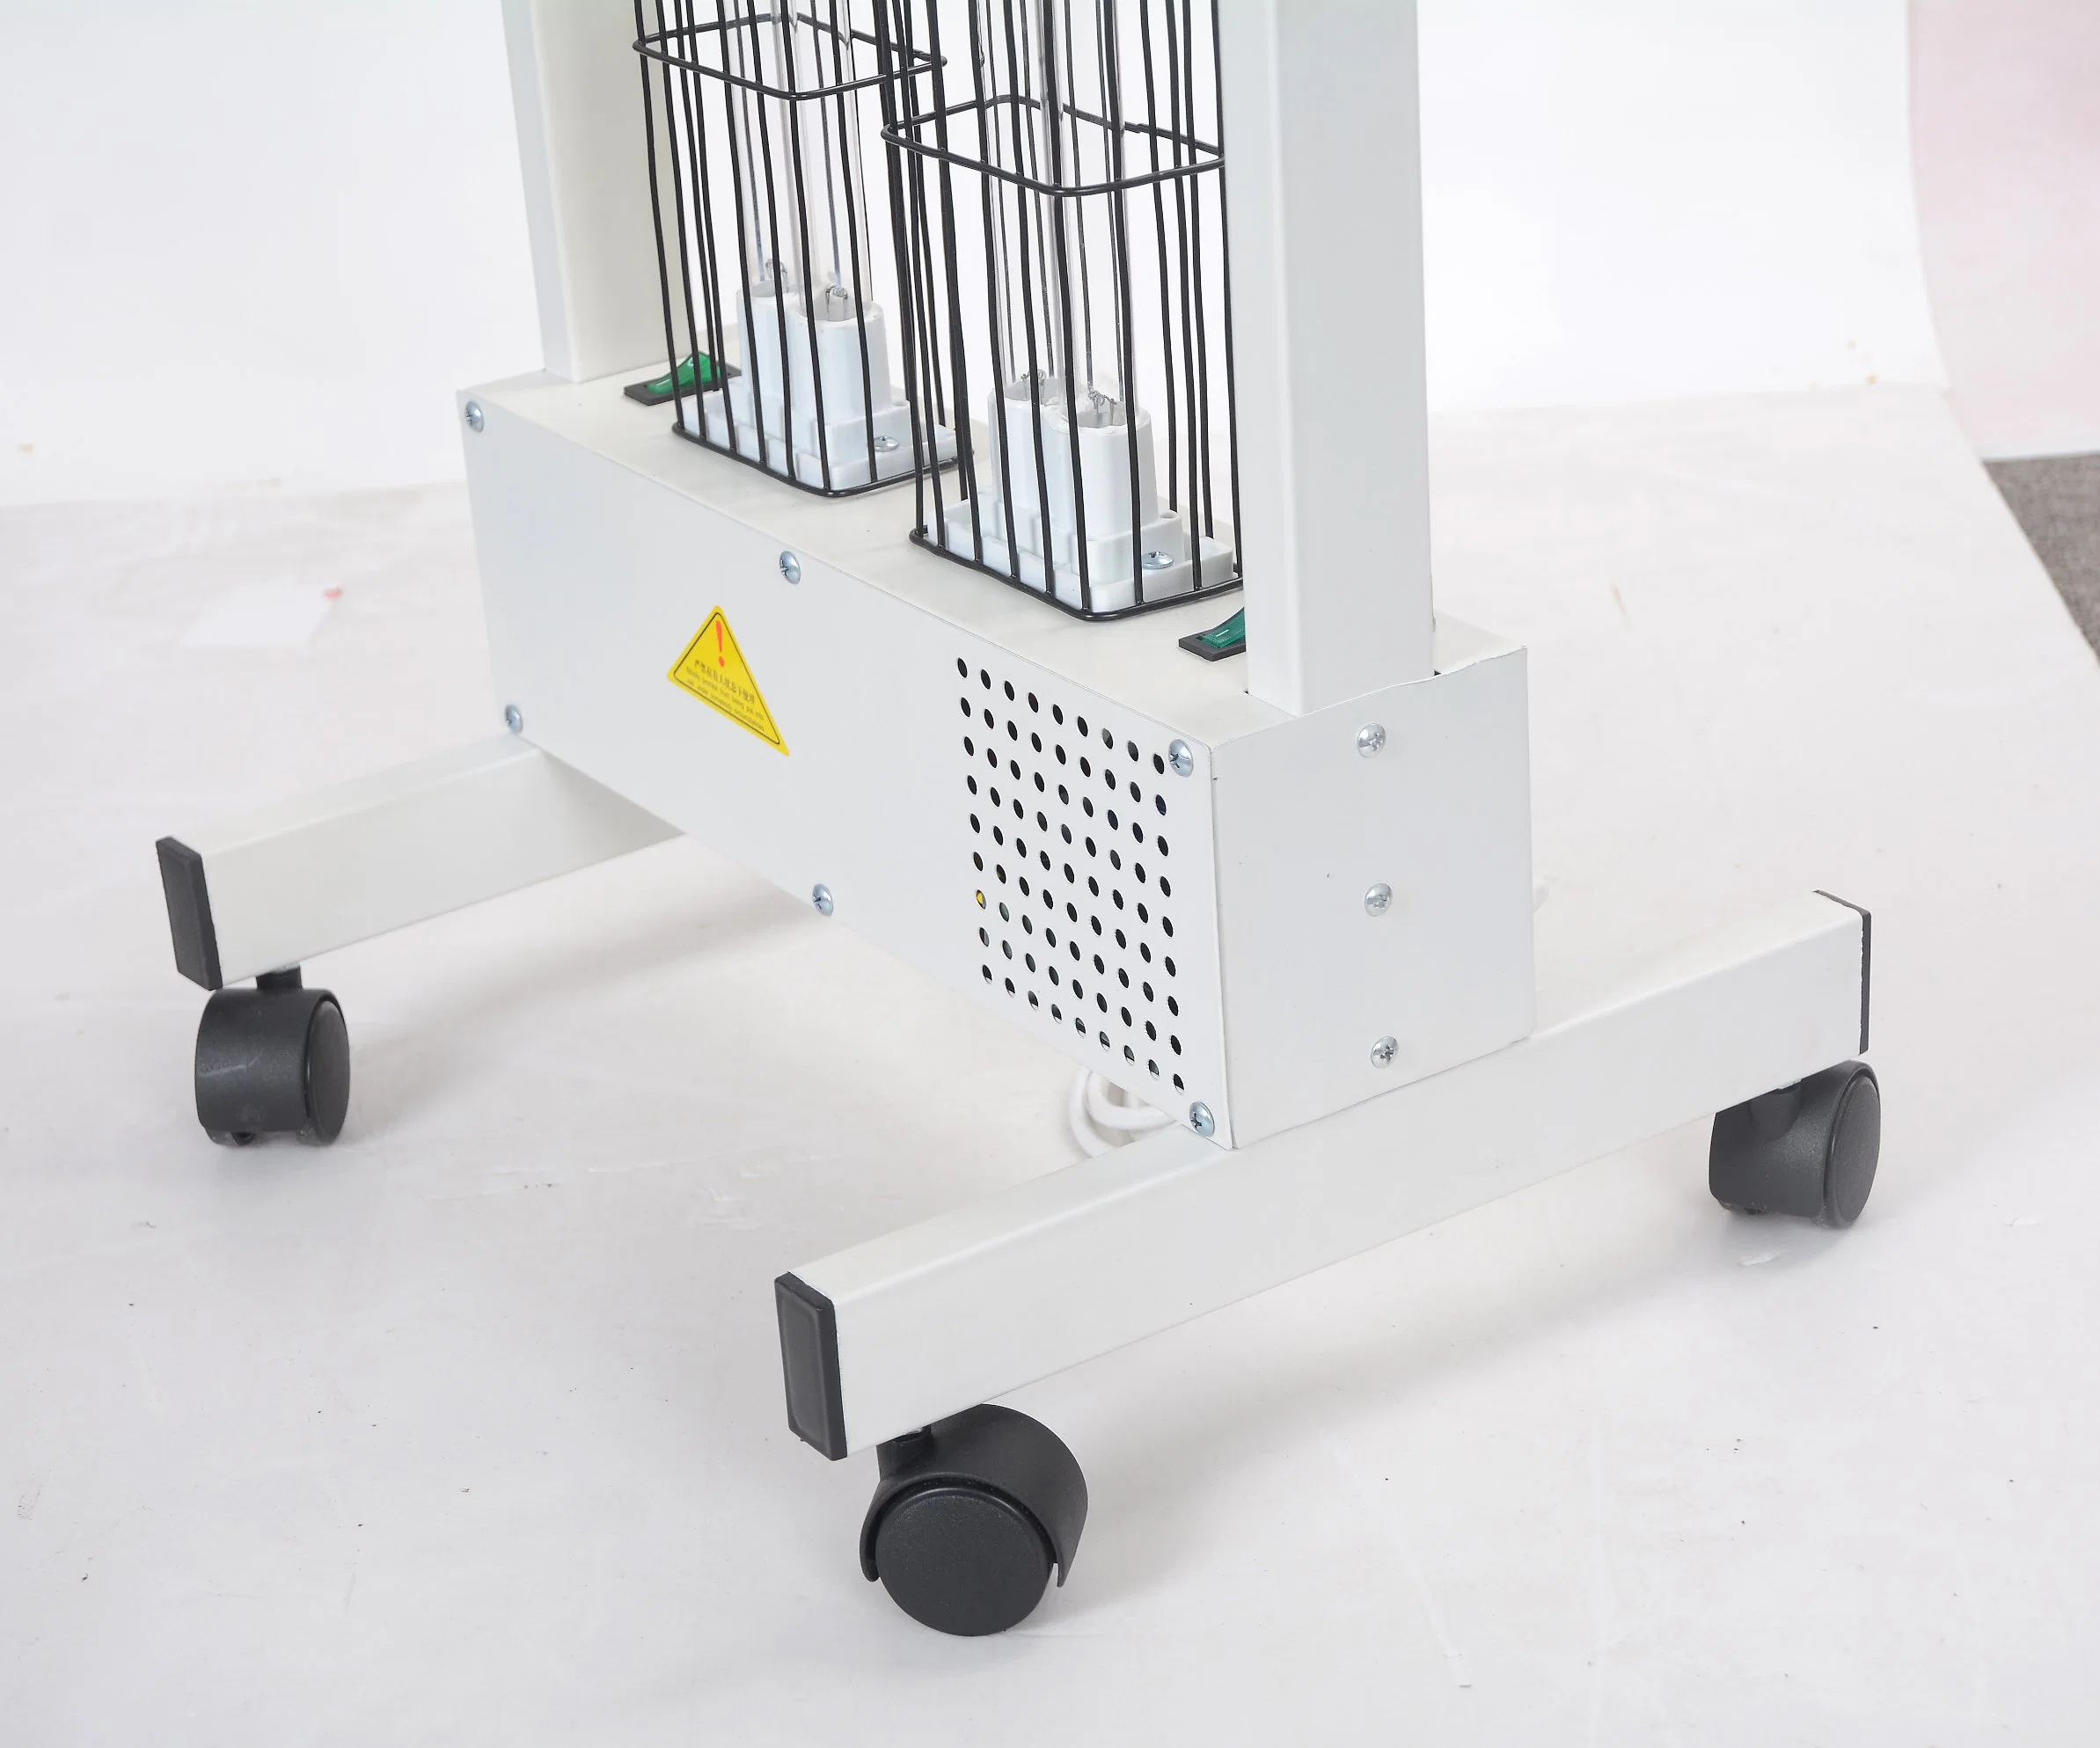 Newest 300W UV Sterilization Lamp Trolley for Large Space Disinfect